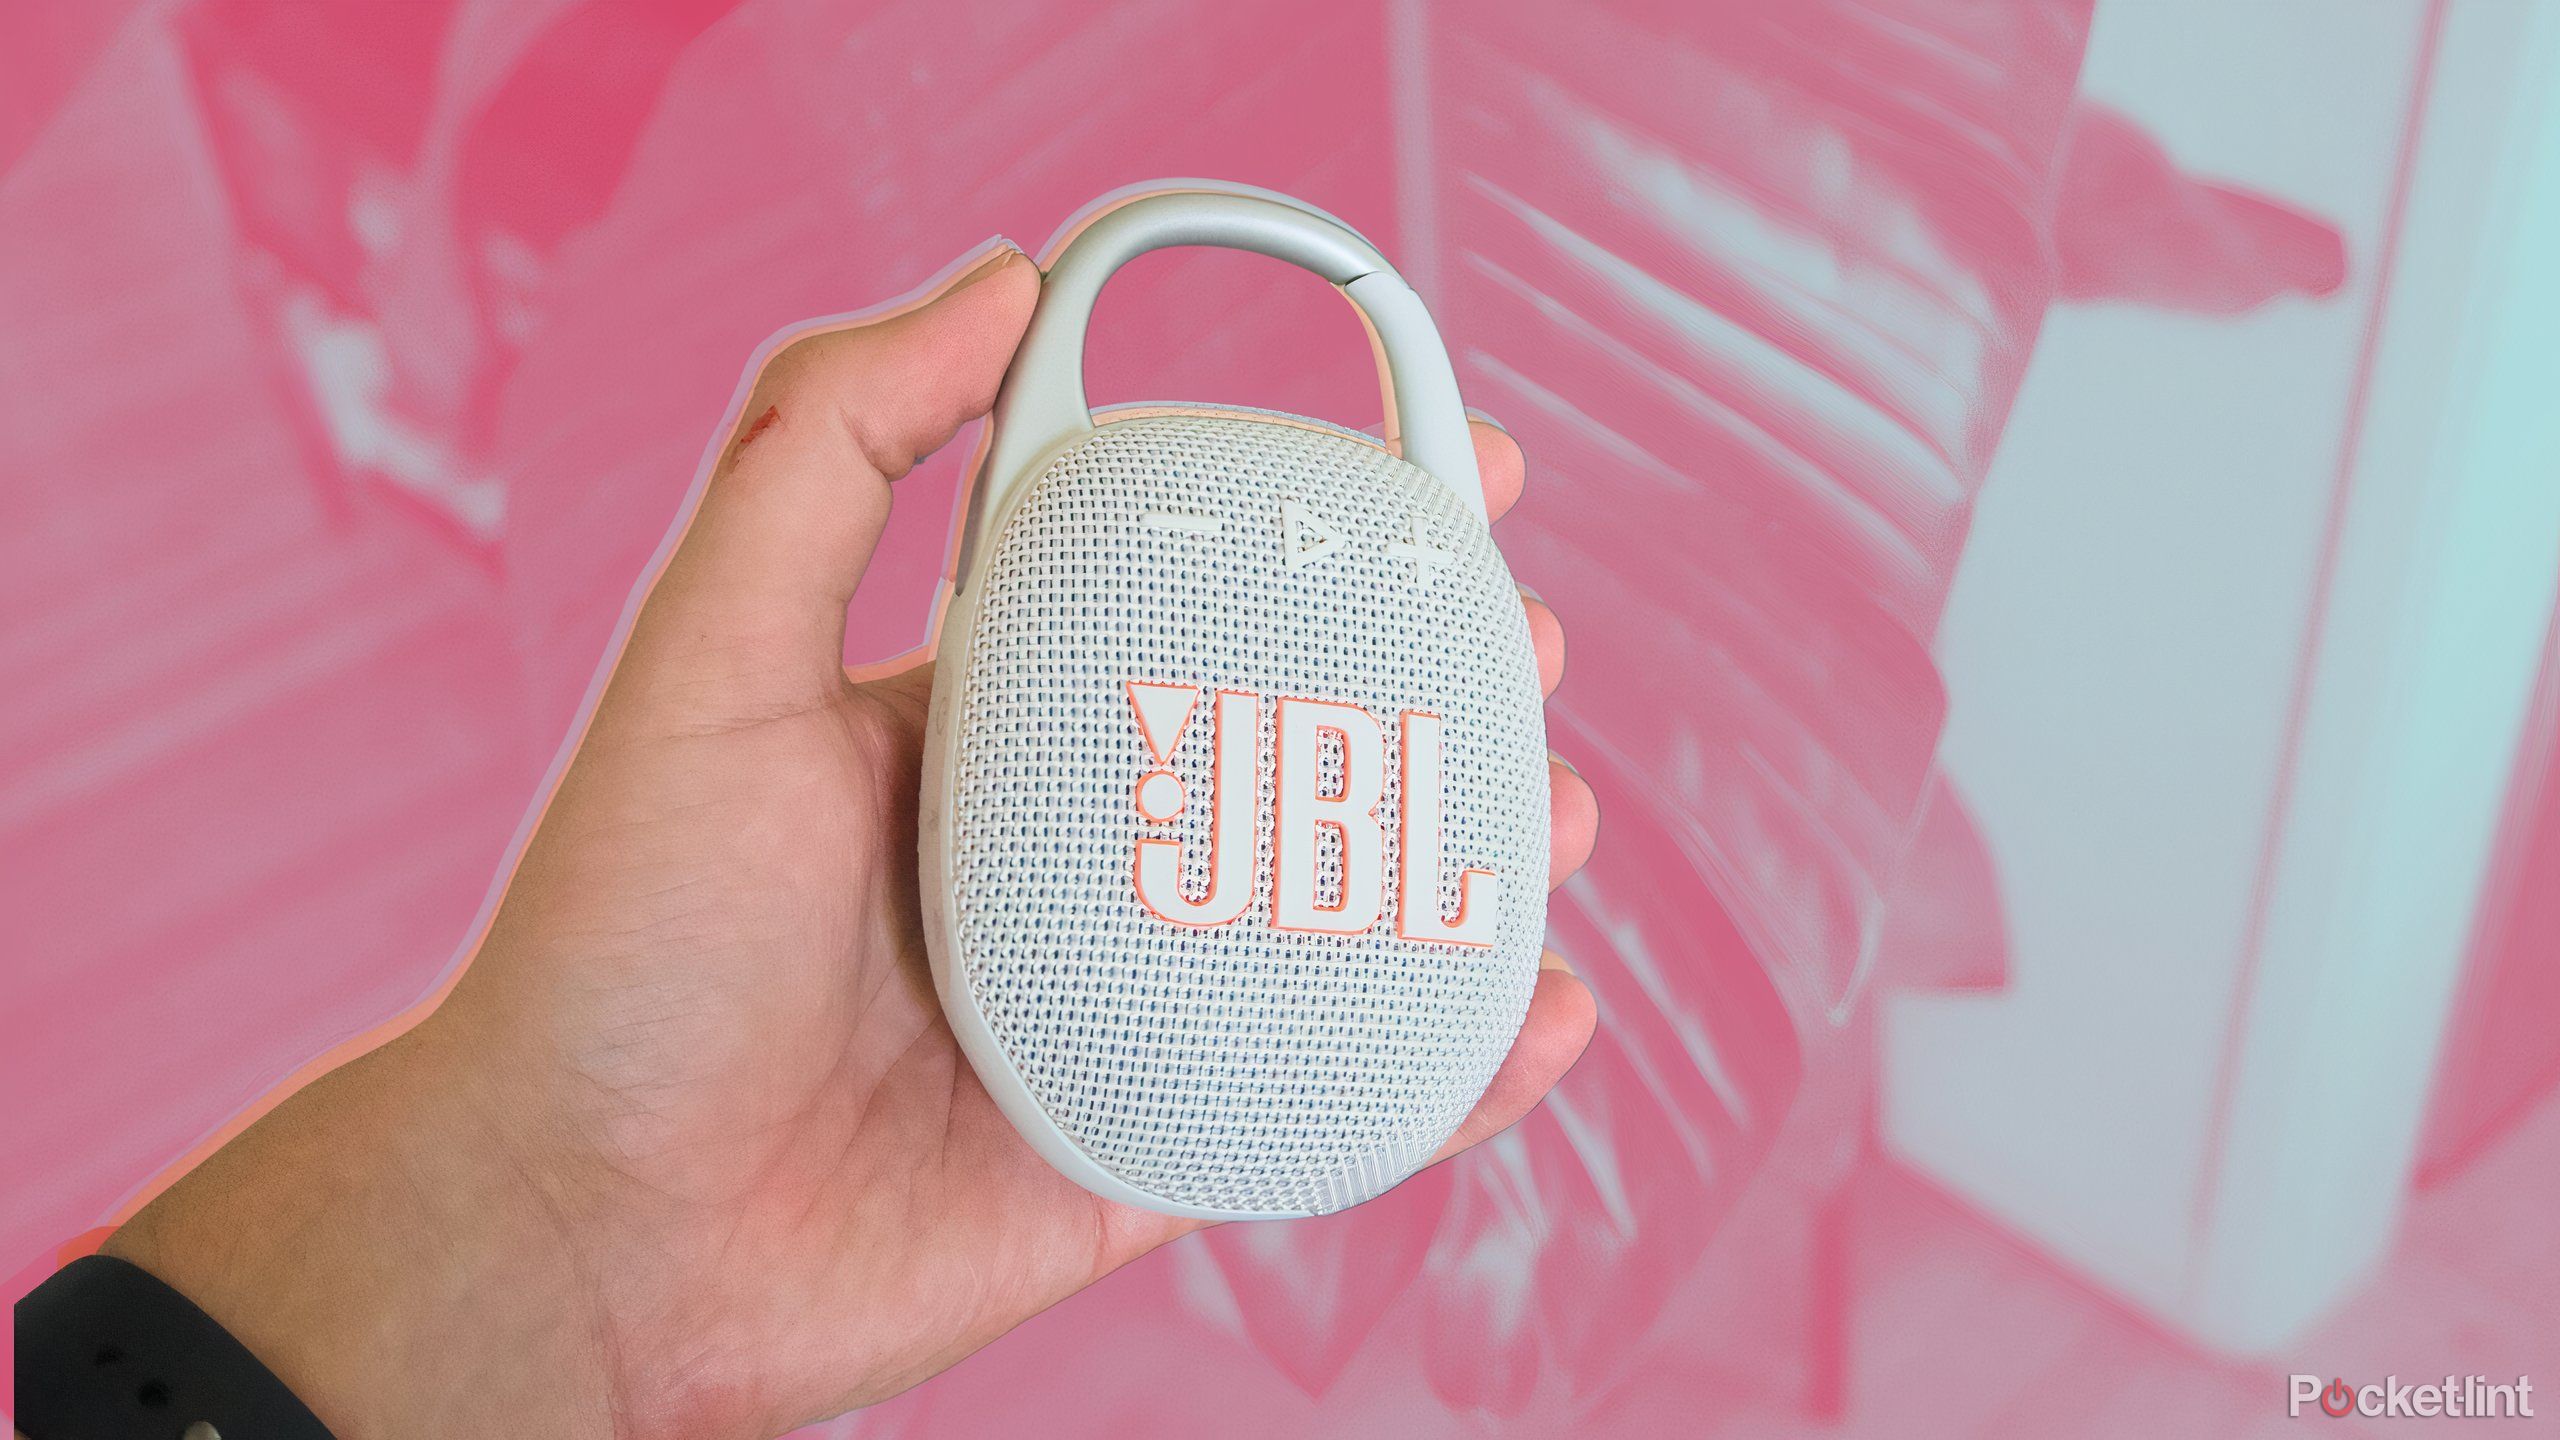 A JBL Clip 5 speaker being held in someone's hand over a pink background.